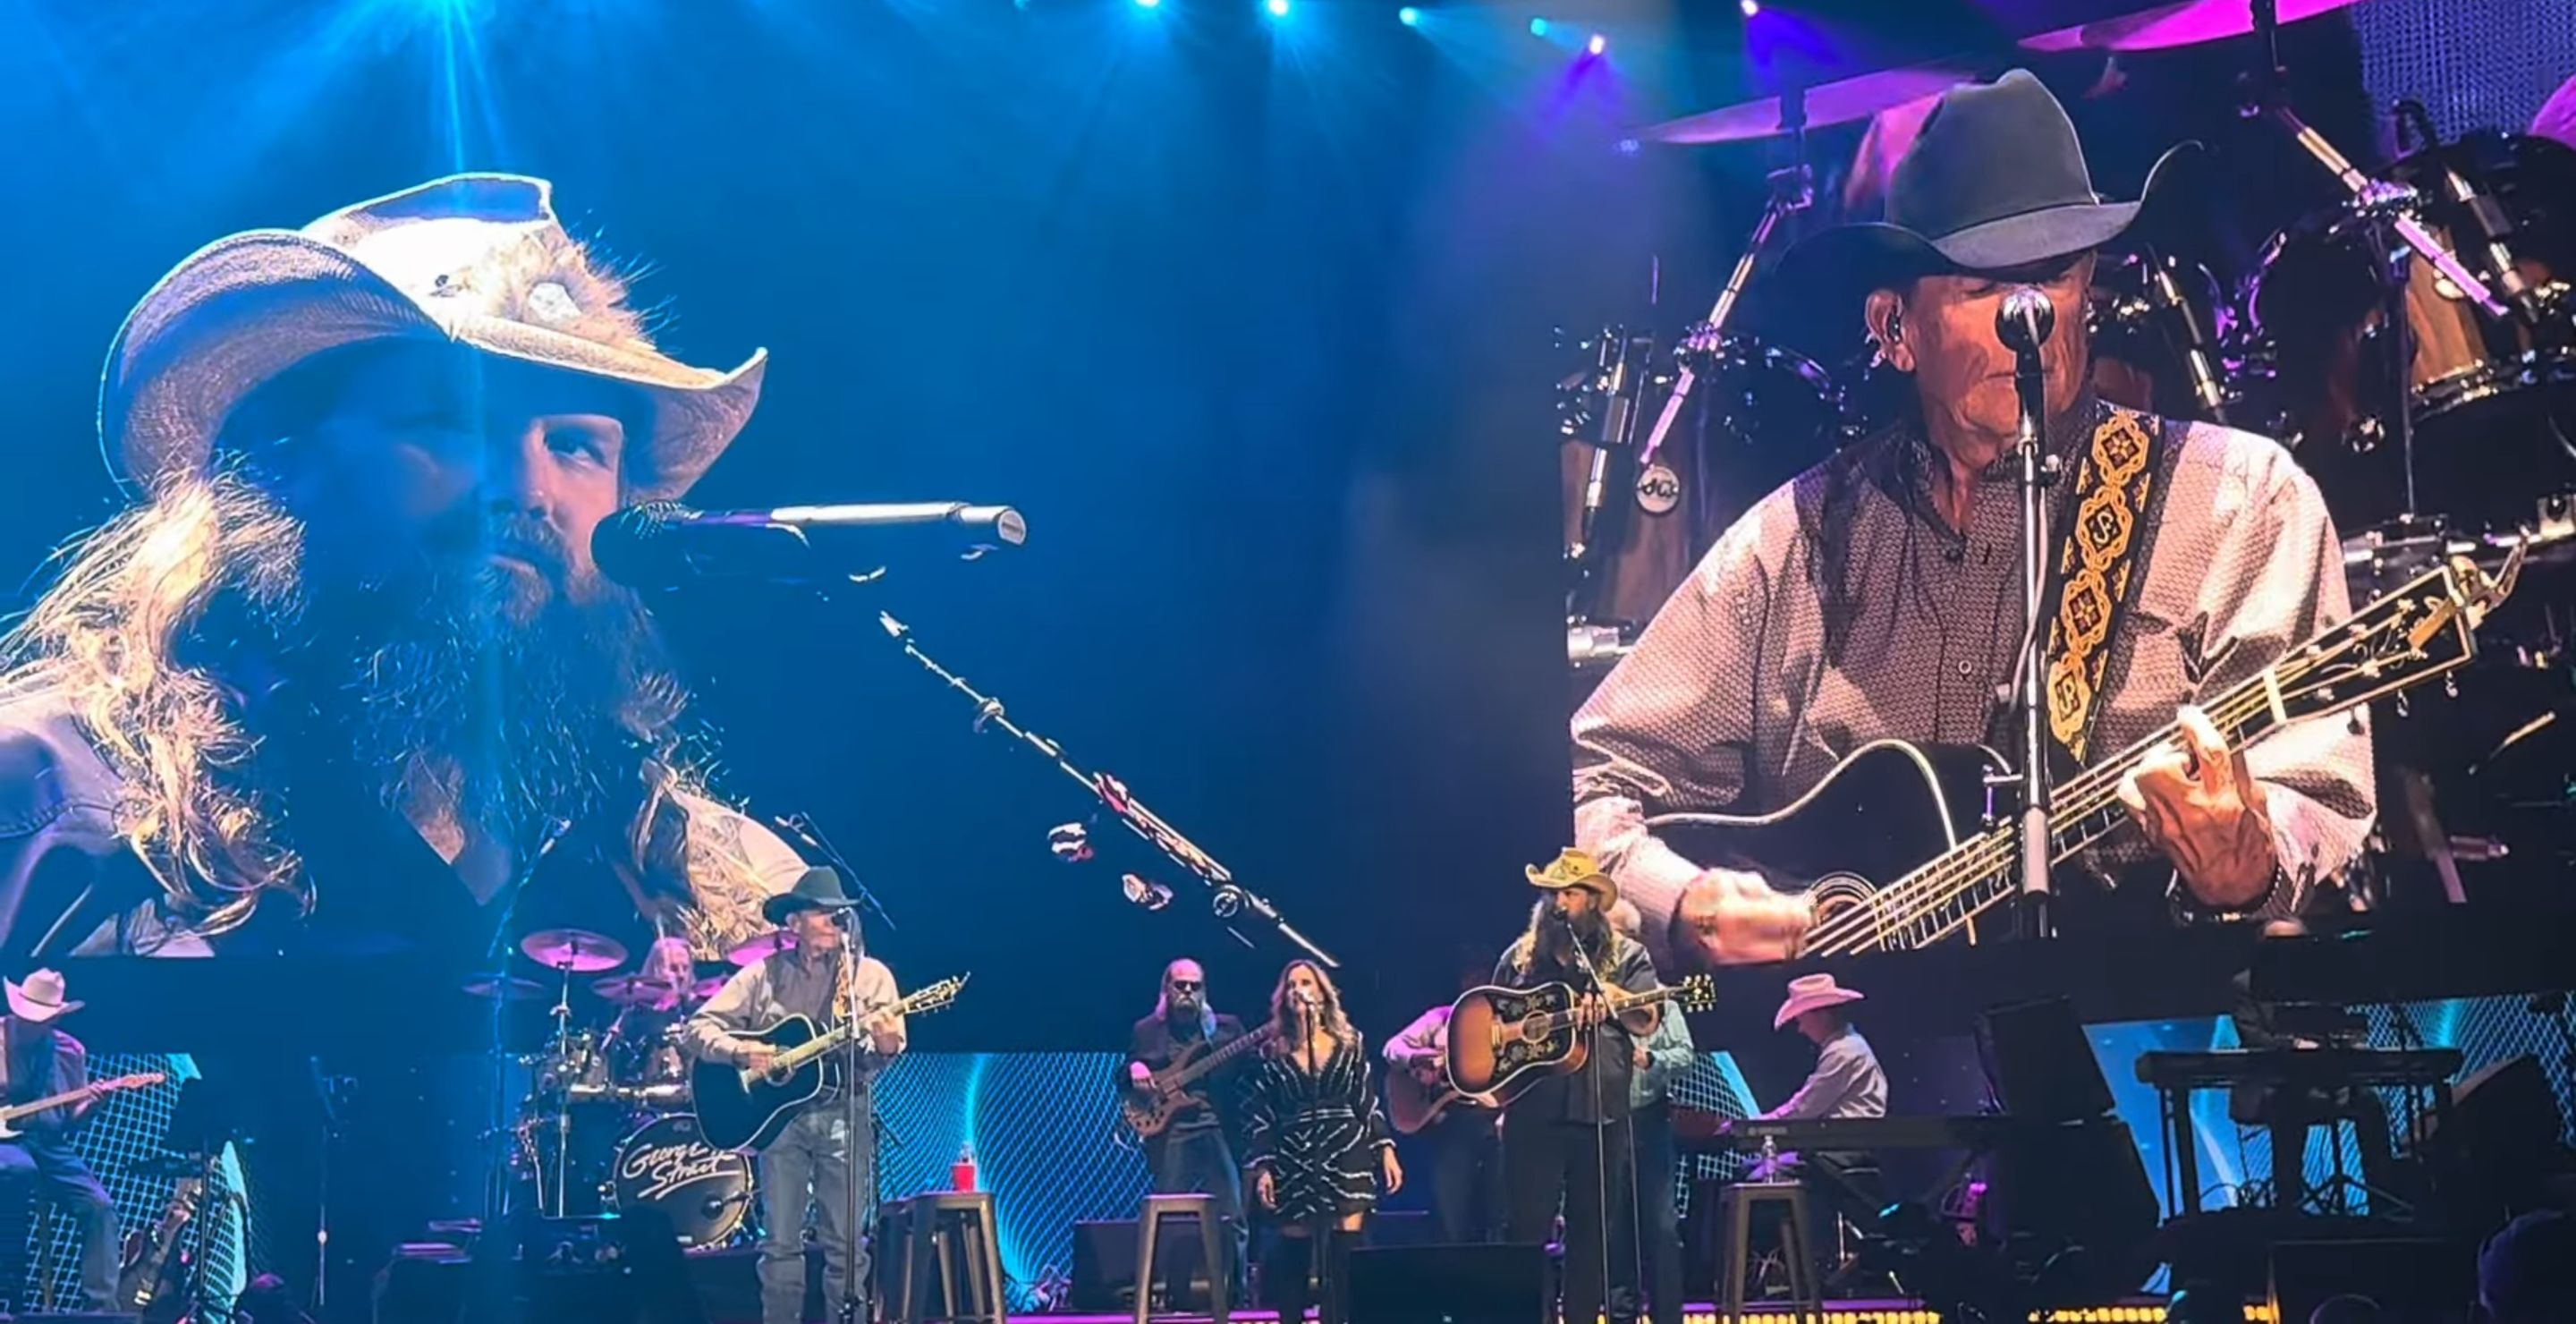 WATCH George Strait & Chris Stapleton Perform Willie Nelson & Merle Haggard's Classic 'Pancho and Lefty'